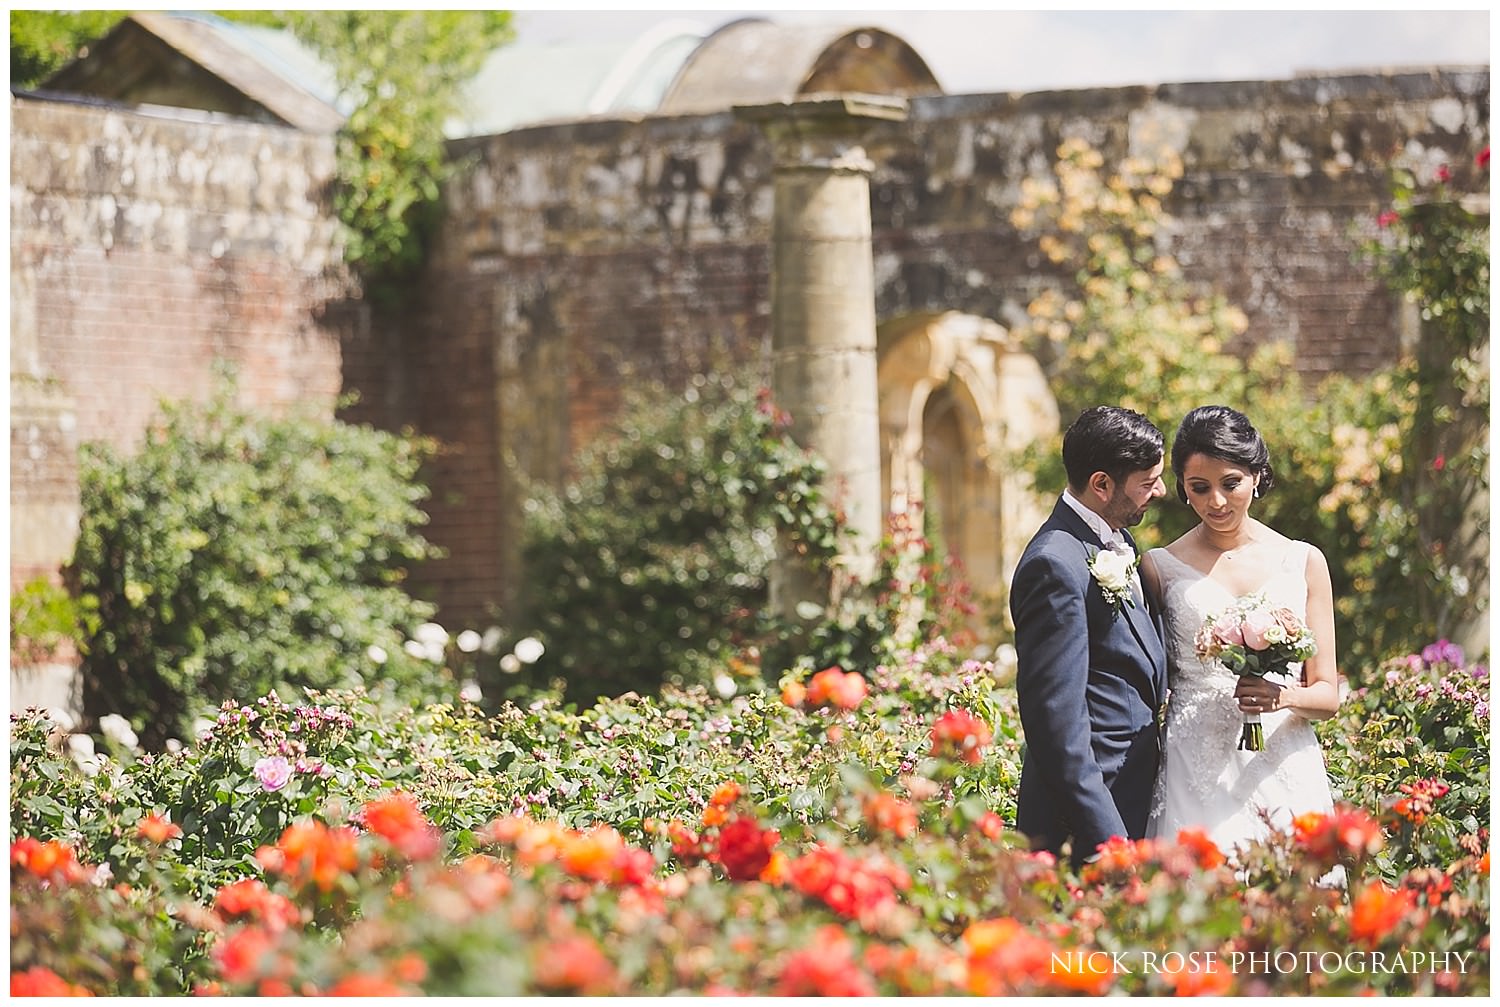  Bride and groom wedding photography portrait in the gardens at Hever Castle Kent 